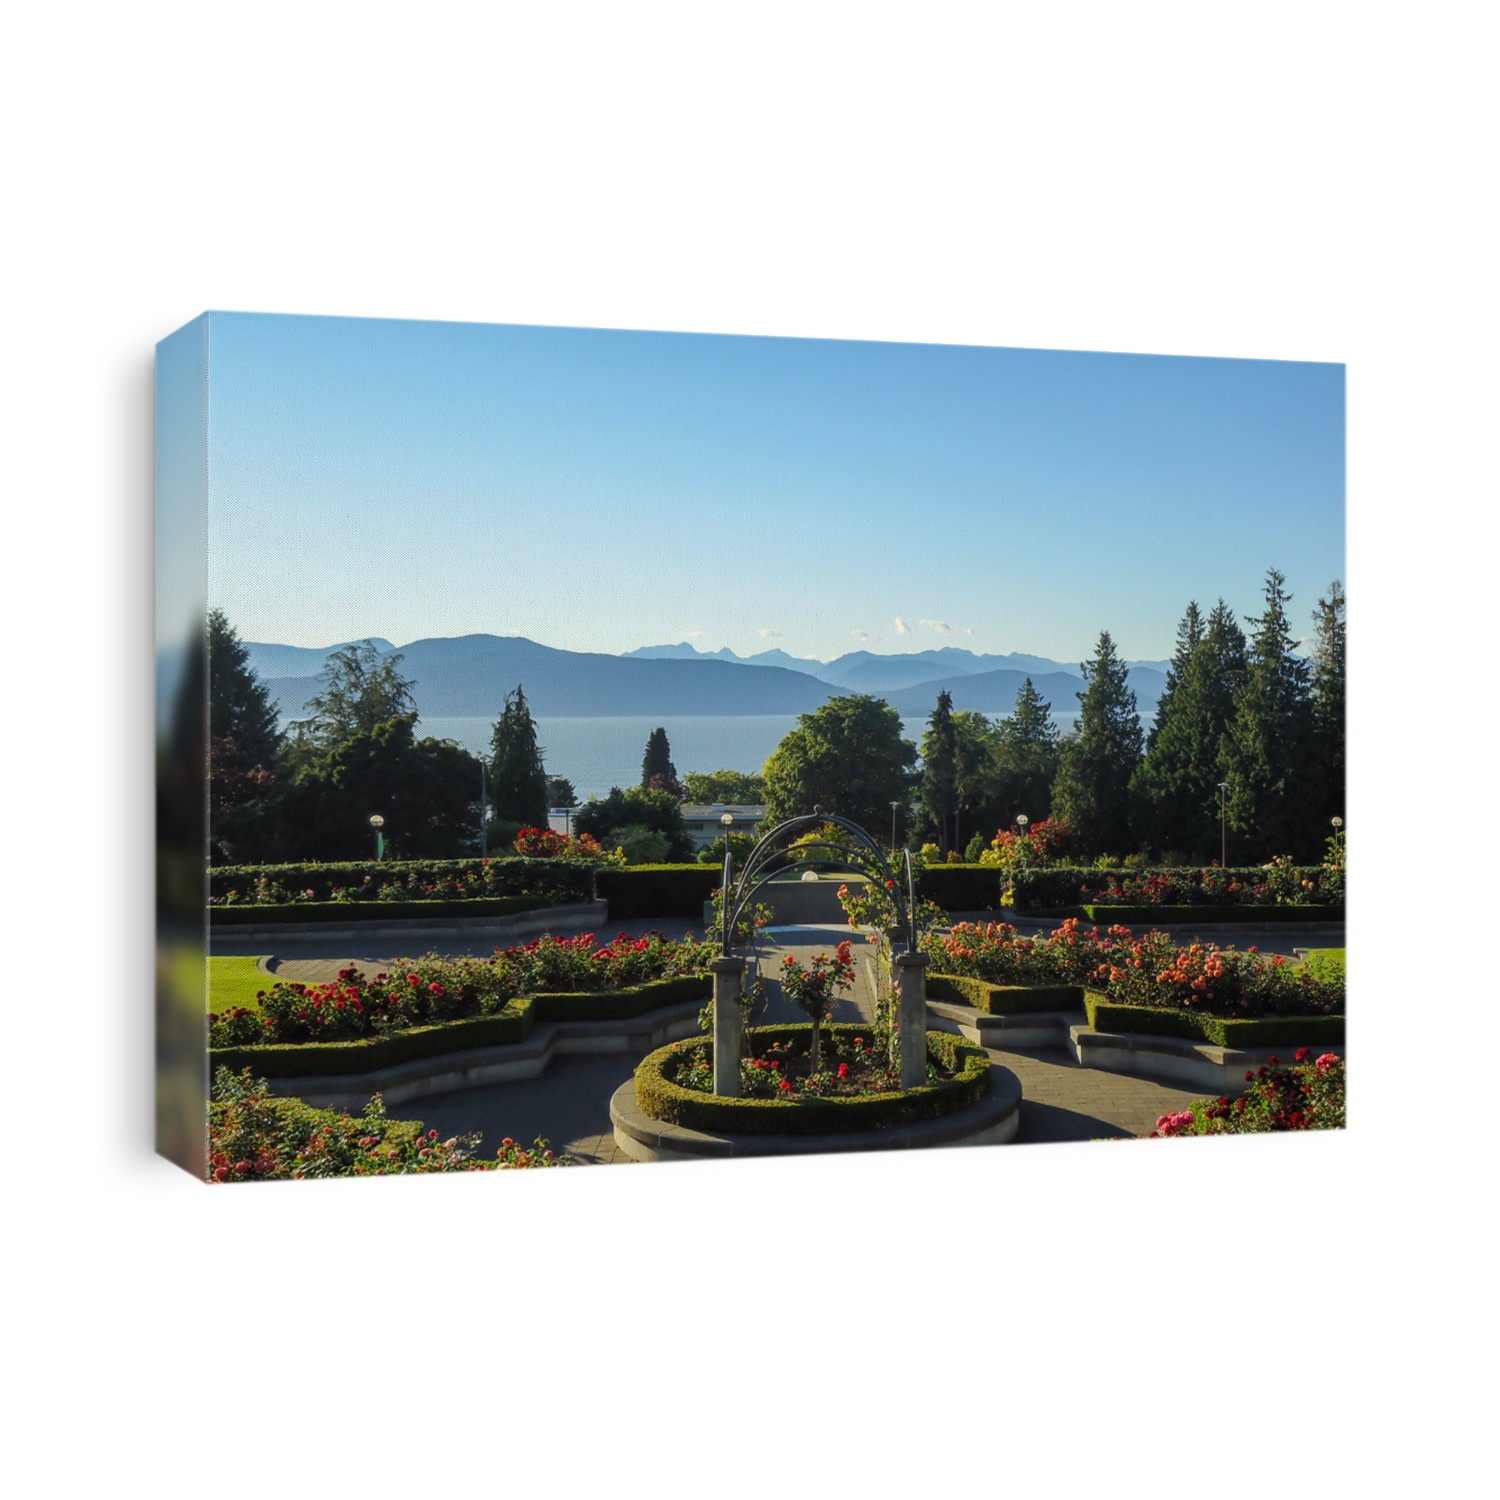 View of the famous rose garden of the university of british columbia campus facing the pacific ocean in vancouver